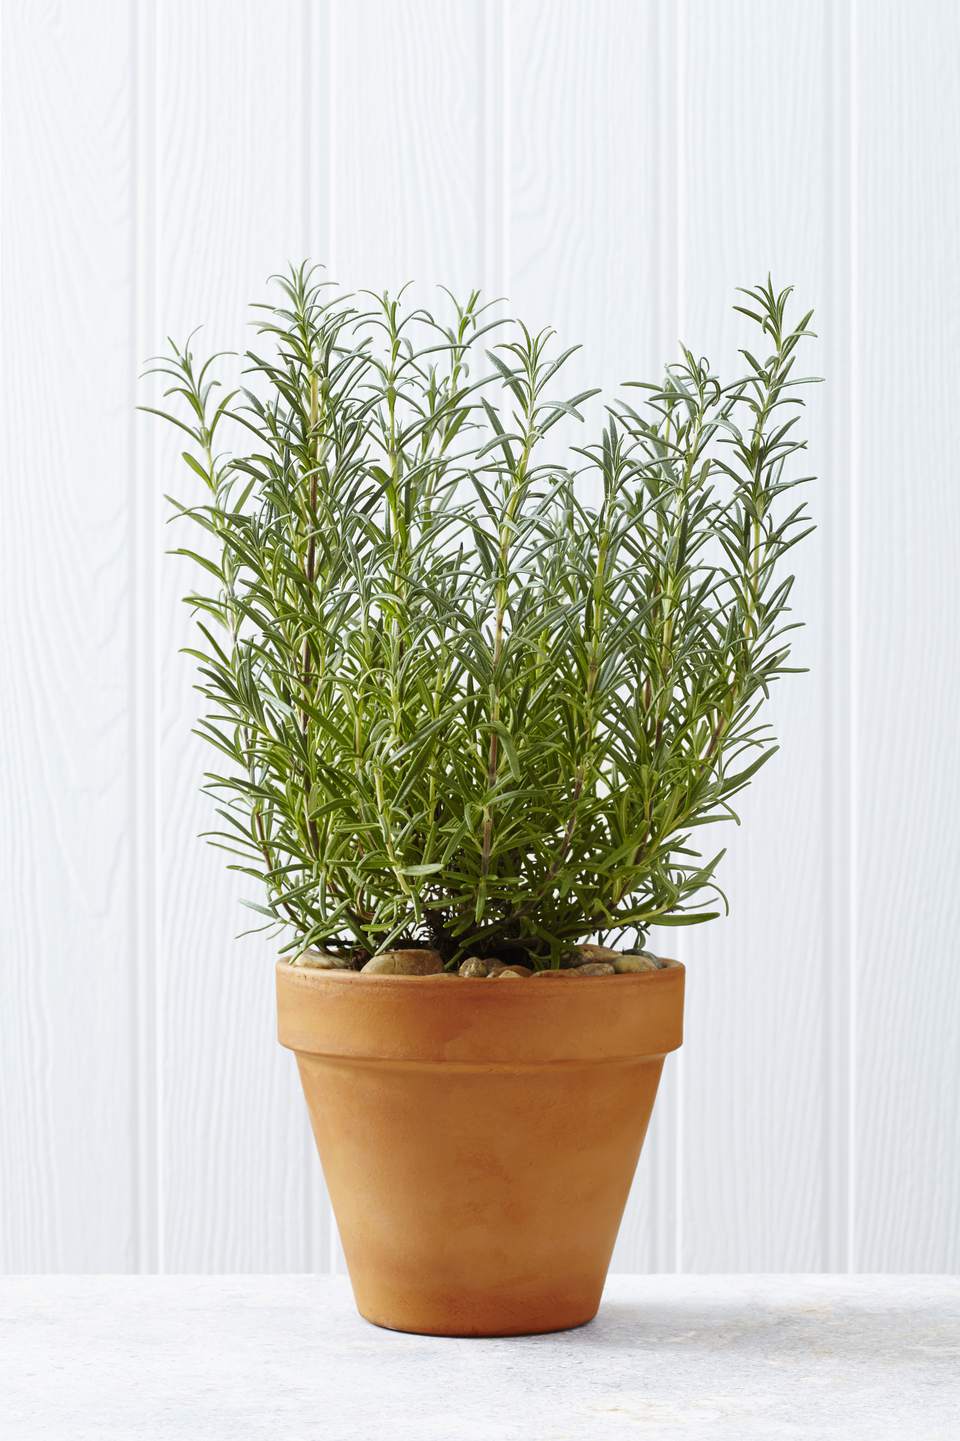 Rosemary is one of the popular plants of the herb garden, helps to fight the insects such as ants.